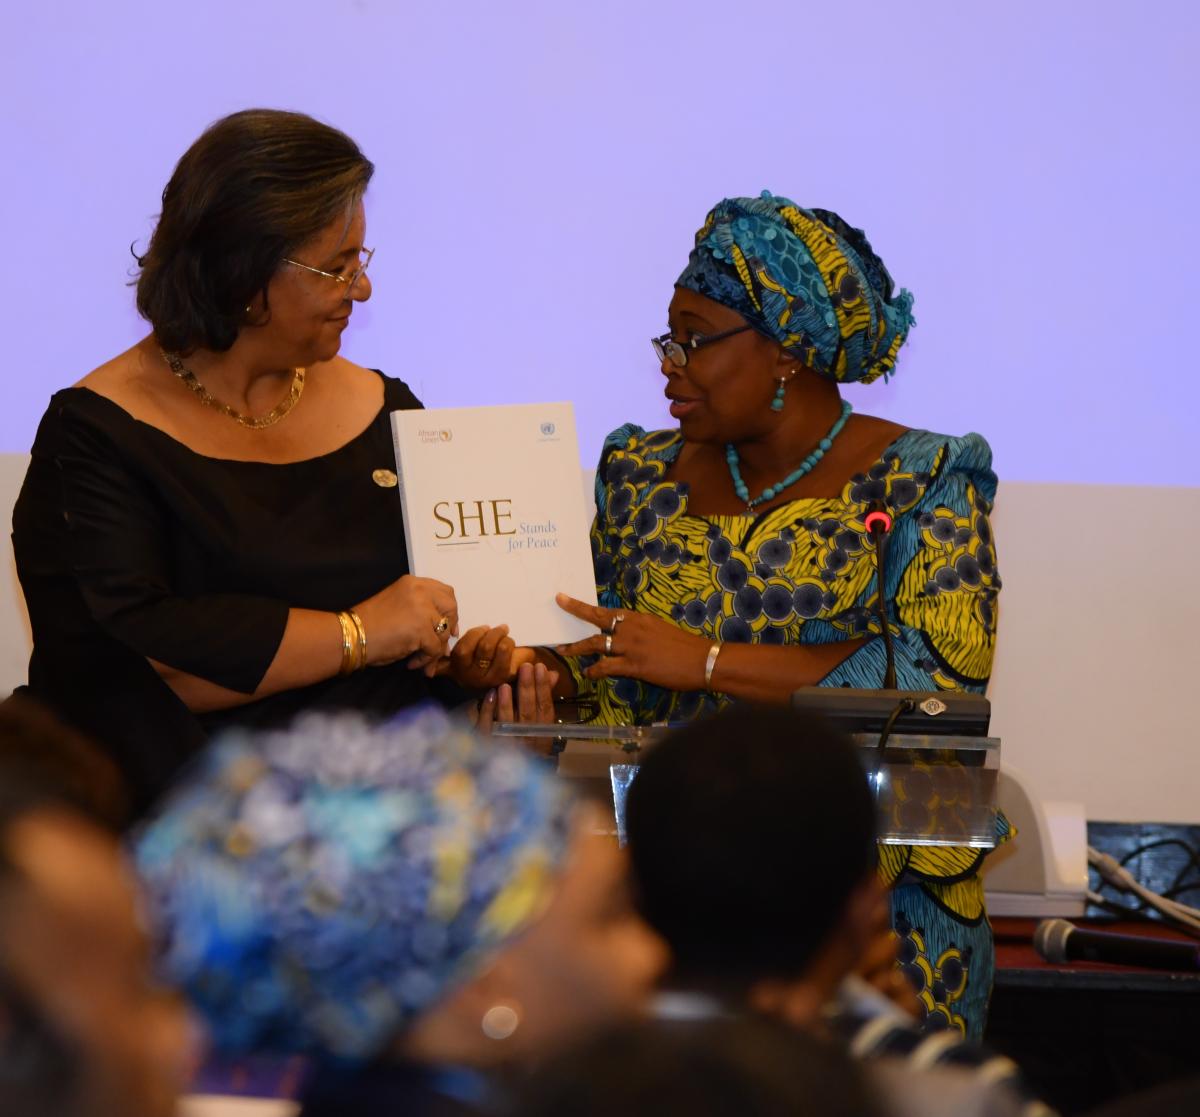 Special Representative of the Secretary-General Hanna Tetteh and the AU Commissioner for Political Affairs, Minata Samate-Cessouma launching the "She Stands for Peace" 20 Years, 20 Journeys book, February 2020.